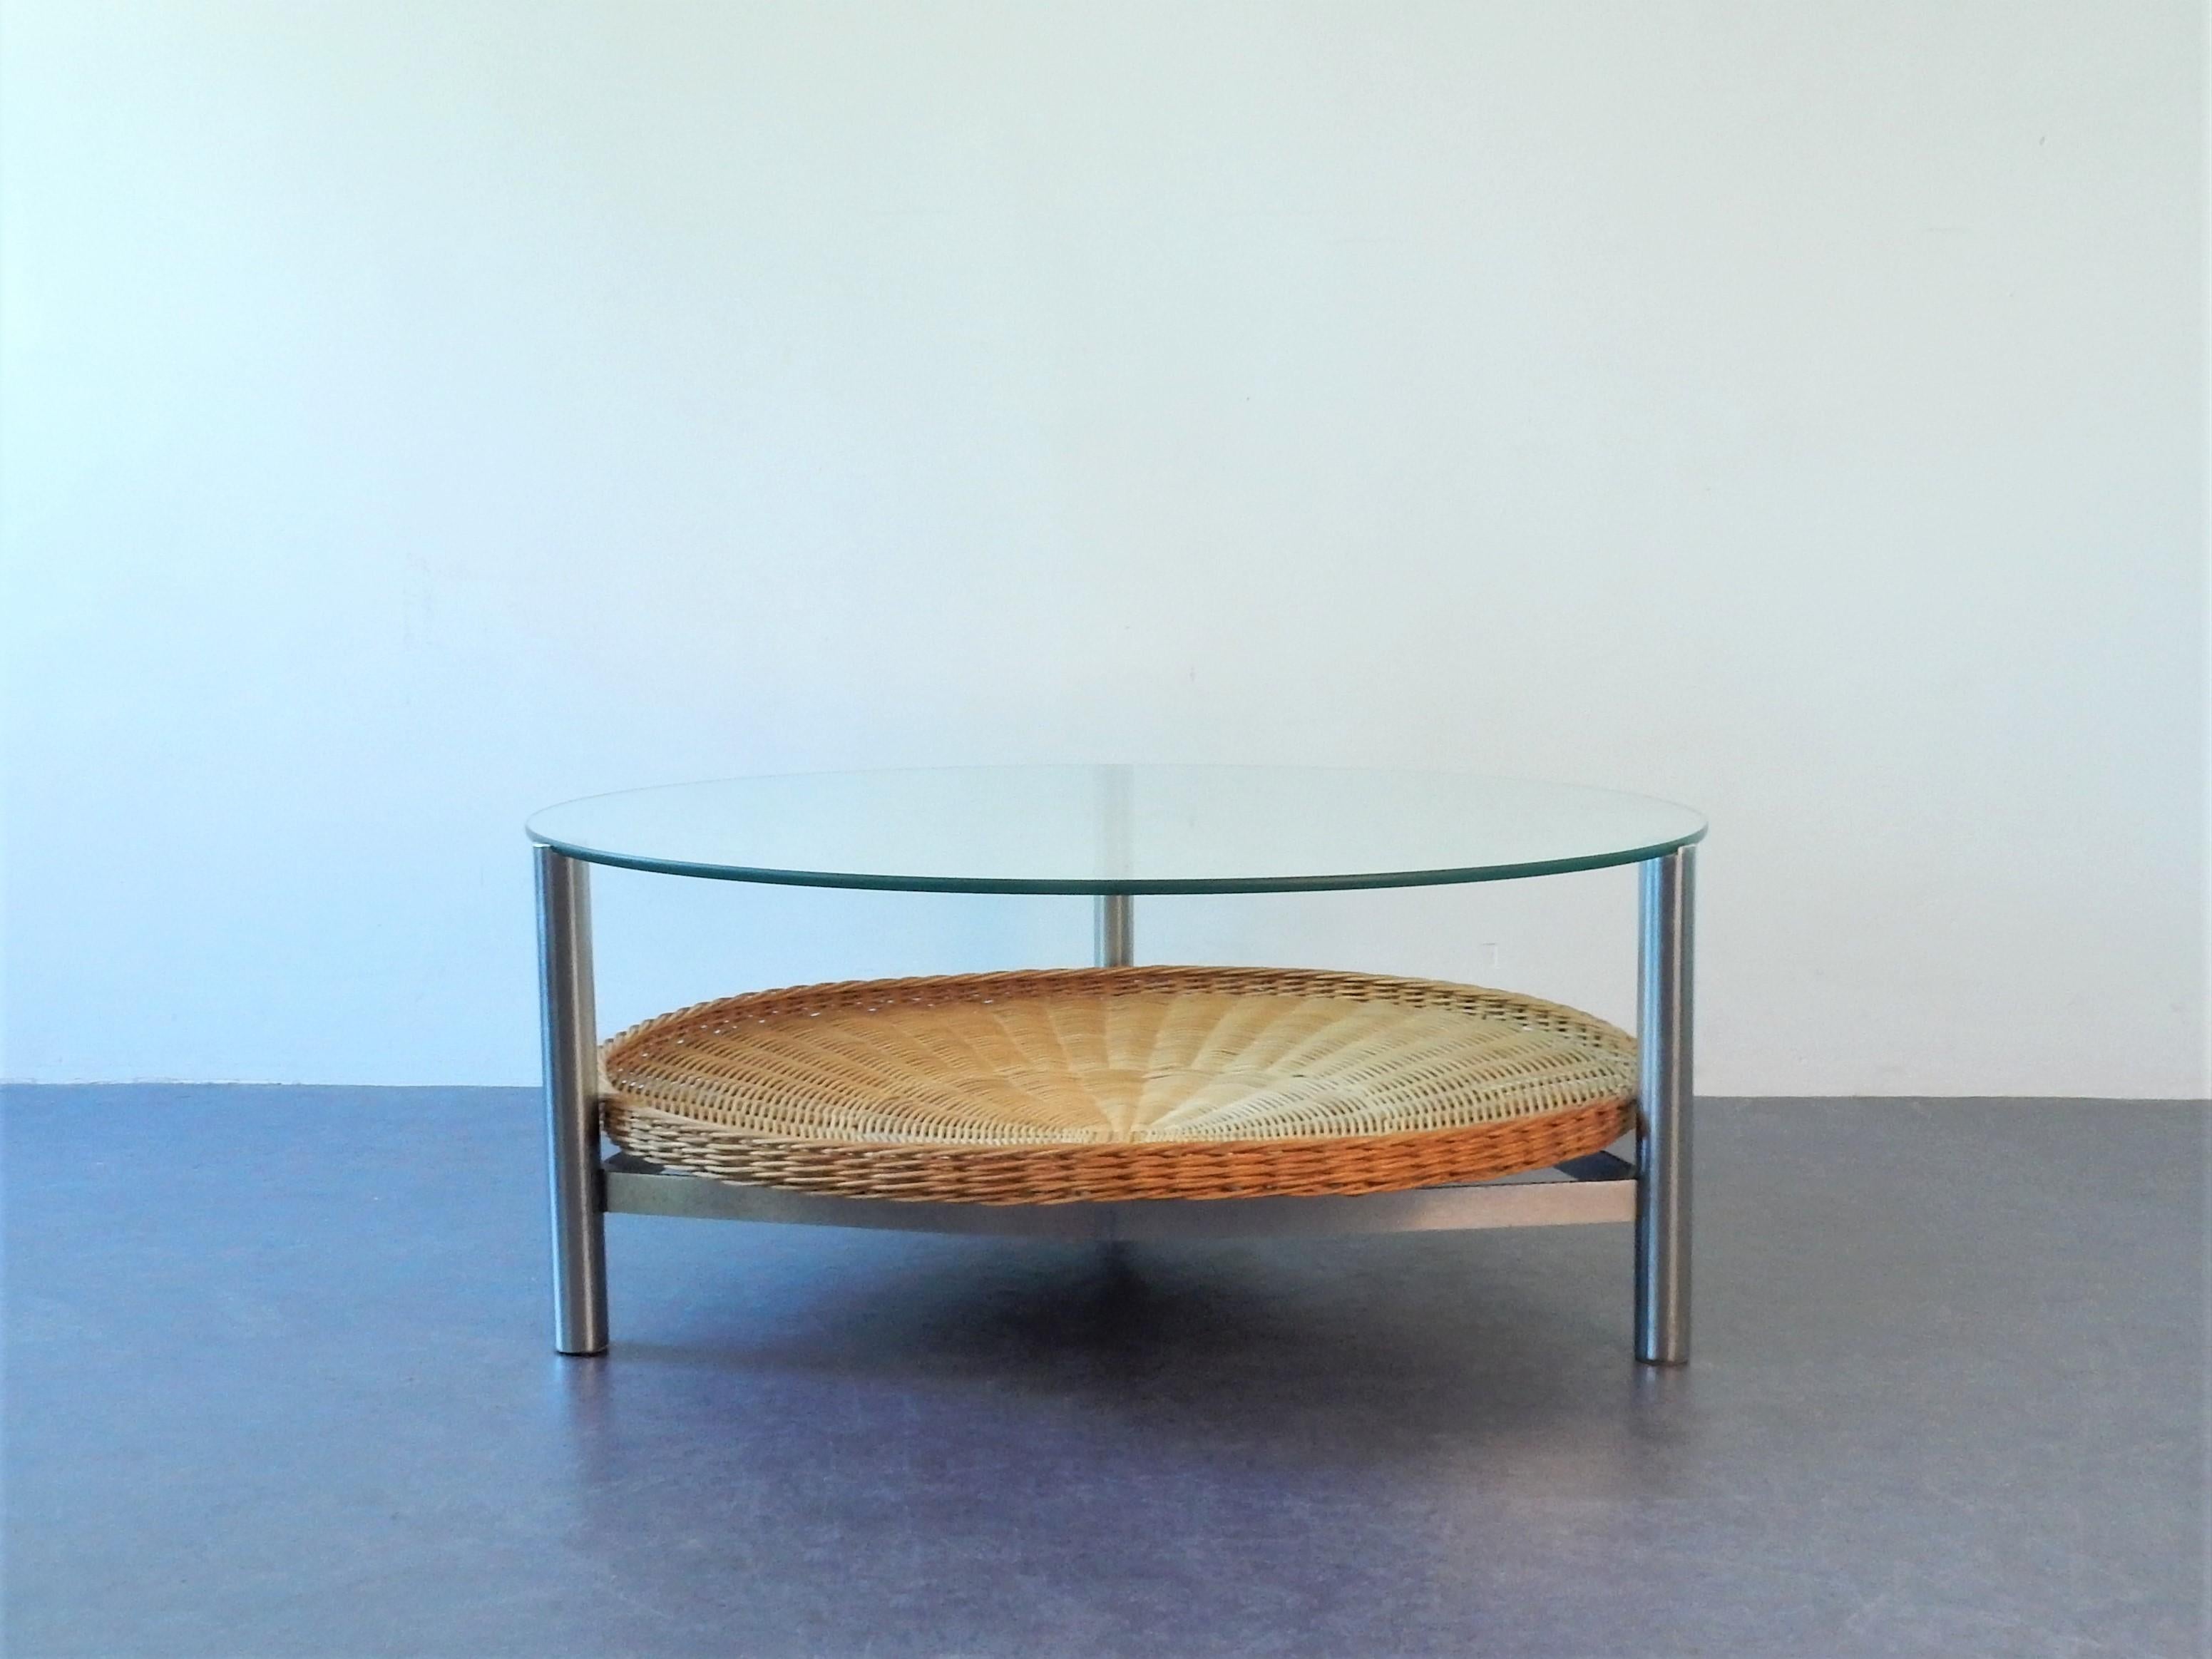 The design of this table does show similarities to the designs and productions of Rohé. It has some scratches and chiploss to the glass top from use and the metal frame shows signs of use as well. The frame and three legs are of solid and heavy